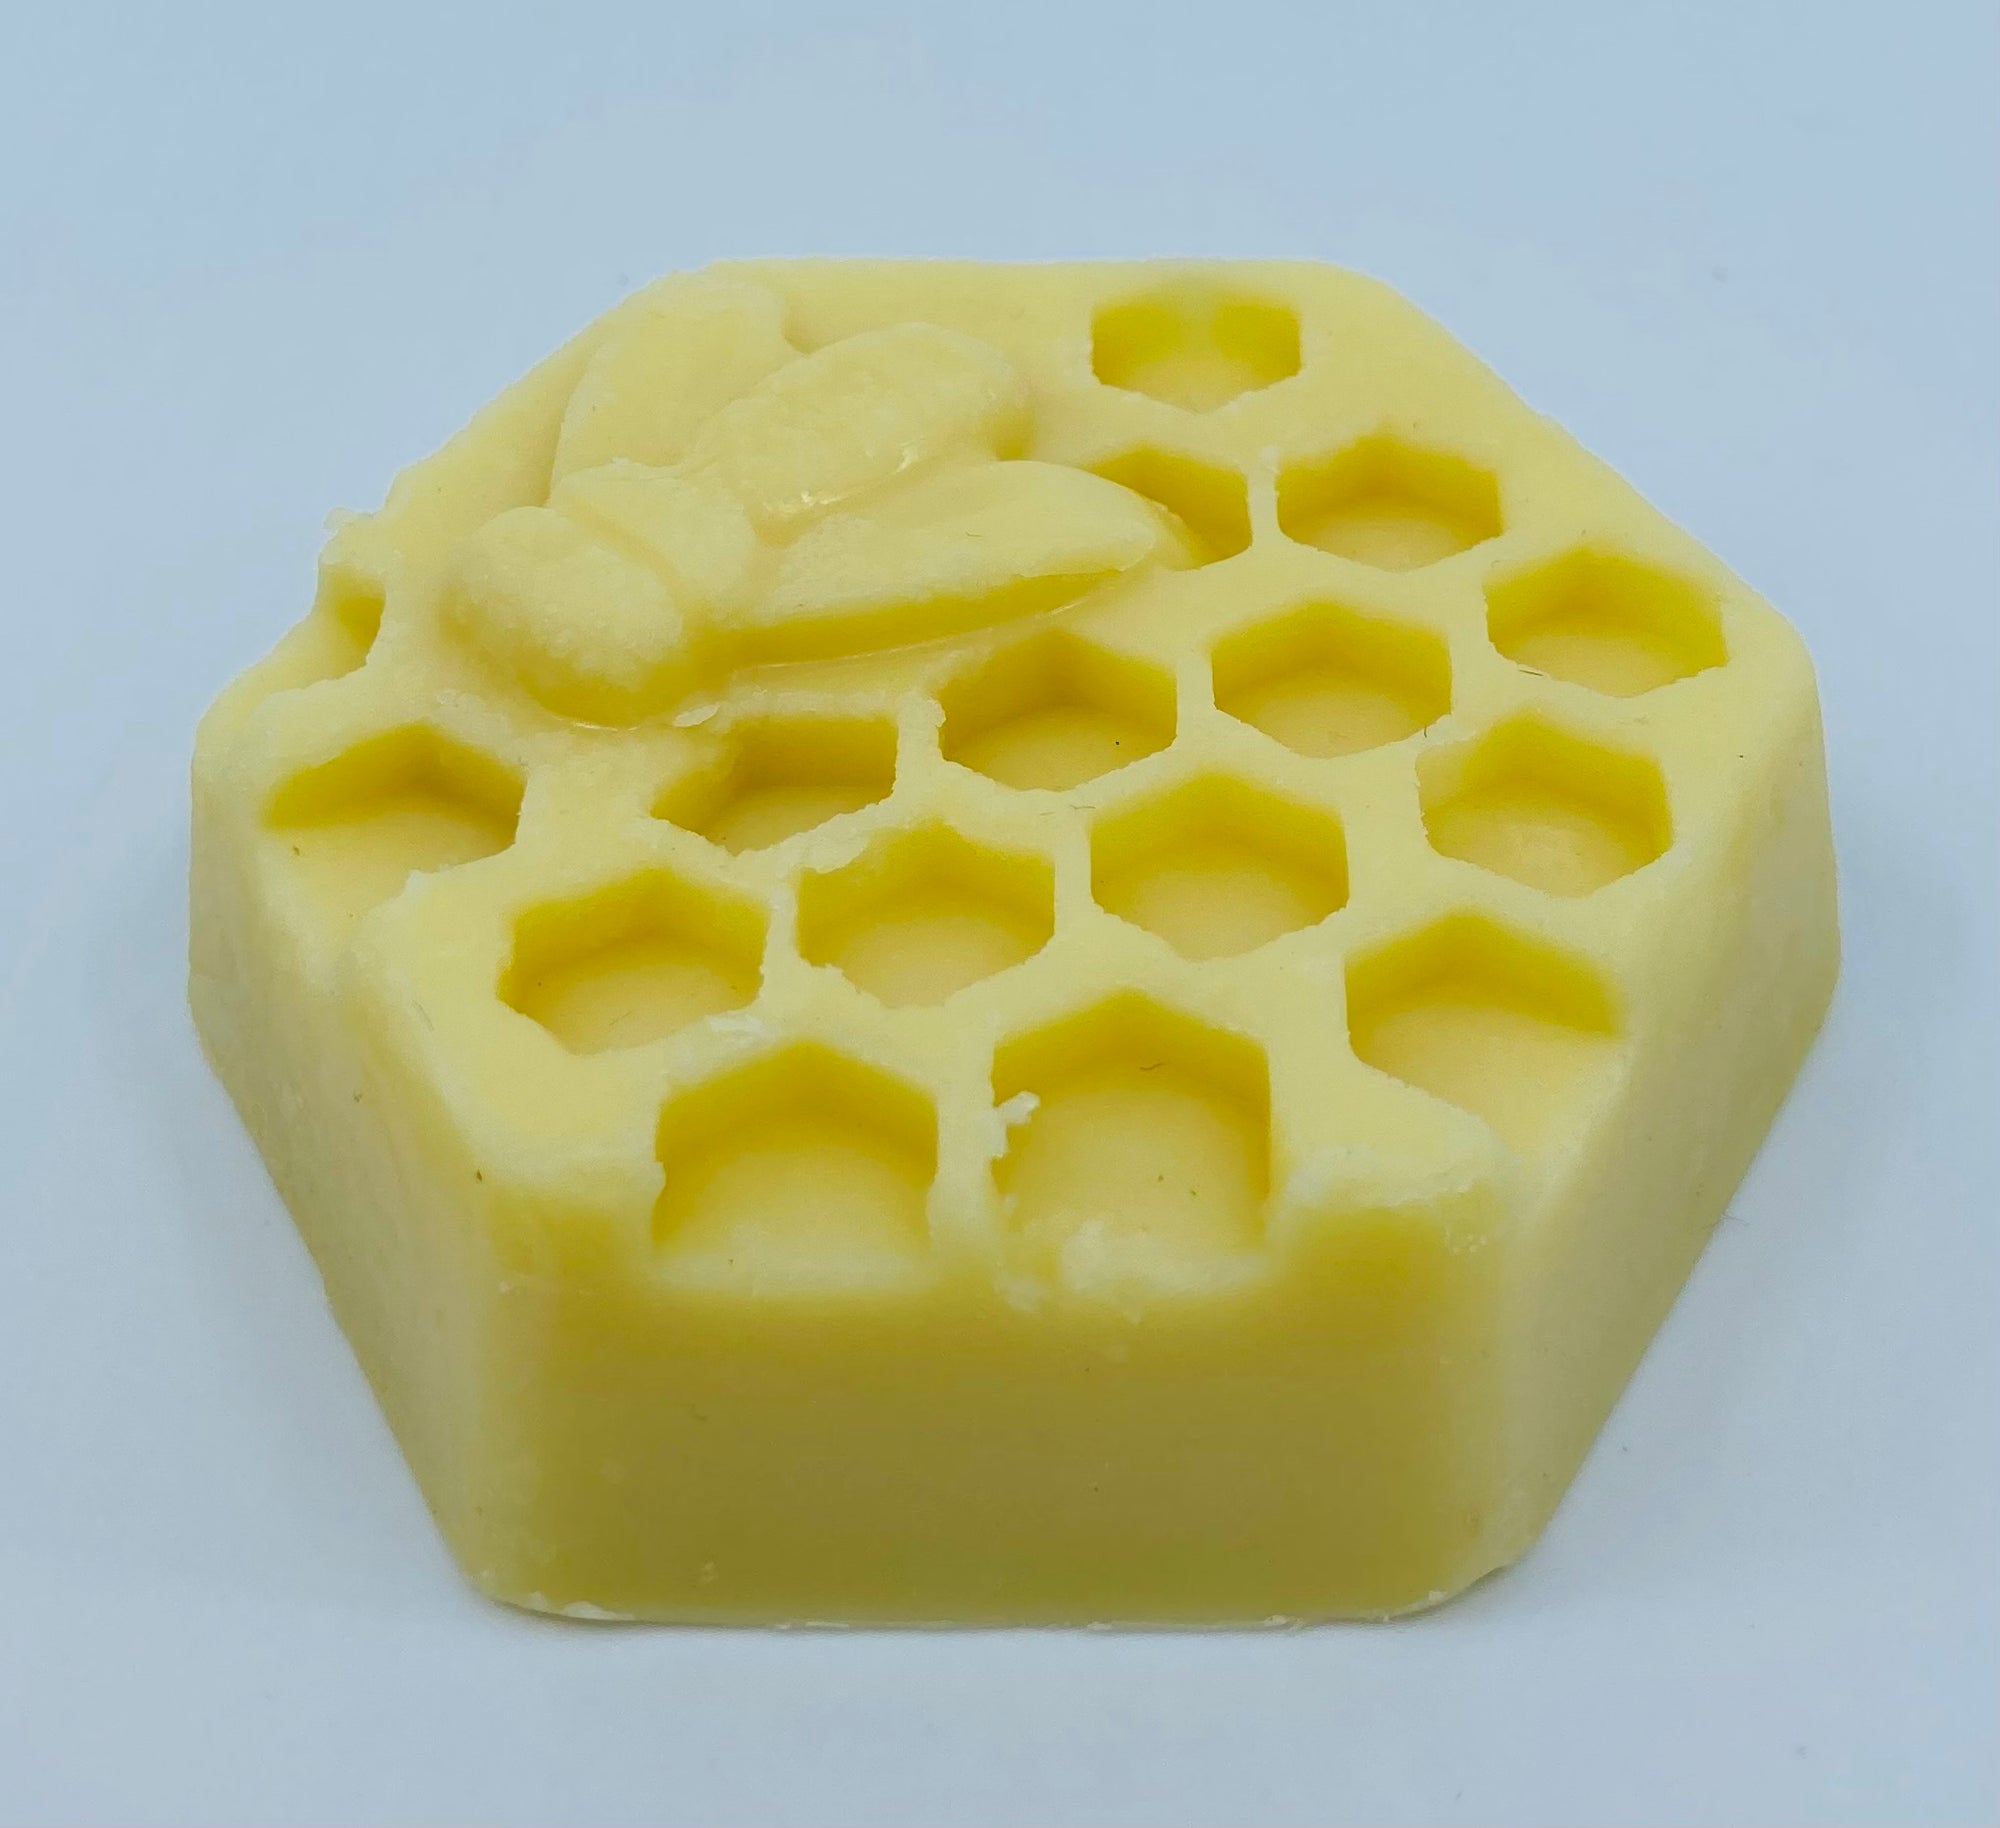 An angled view of the beeswax lotion bar.  Please note that beeswax is a natural resource and there may be variations in color from pale yellow to dark gold.